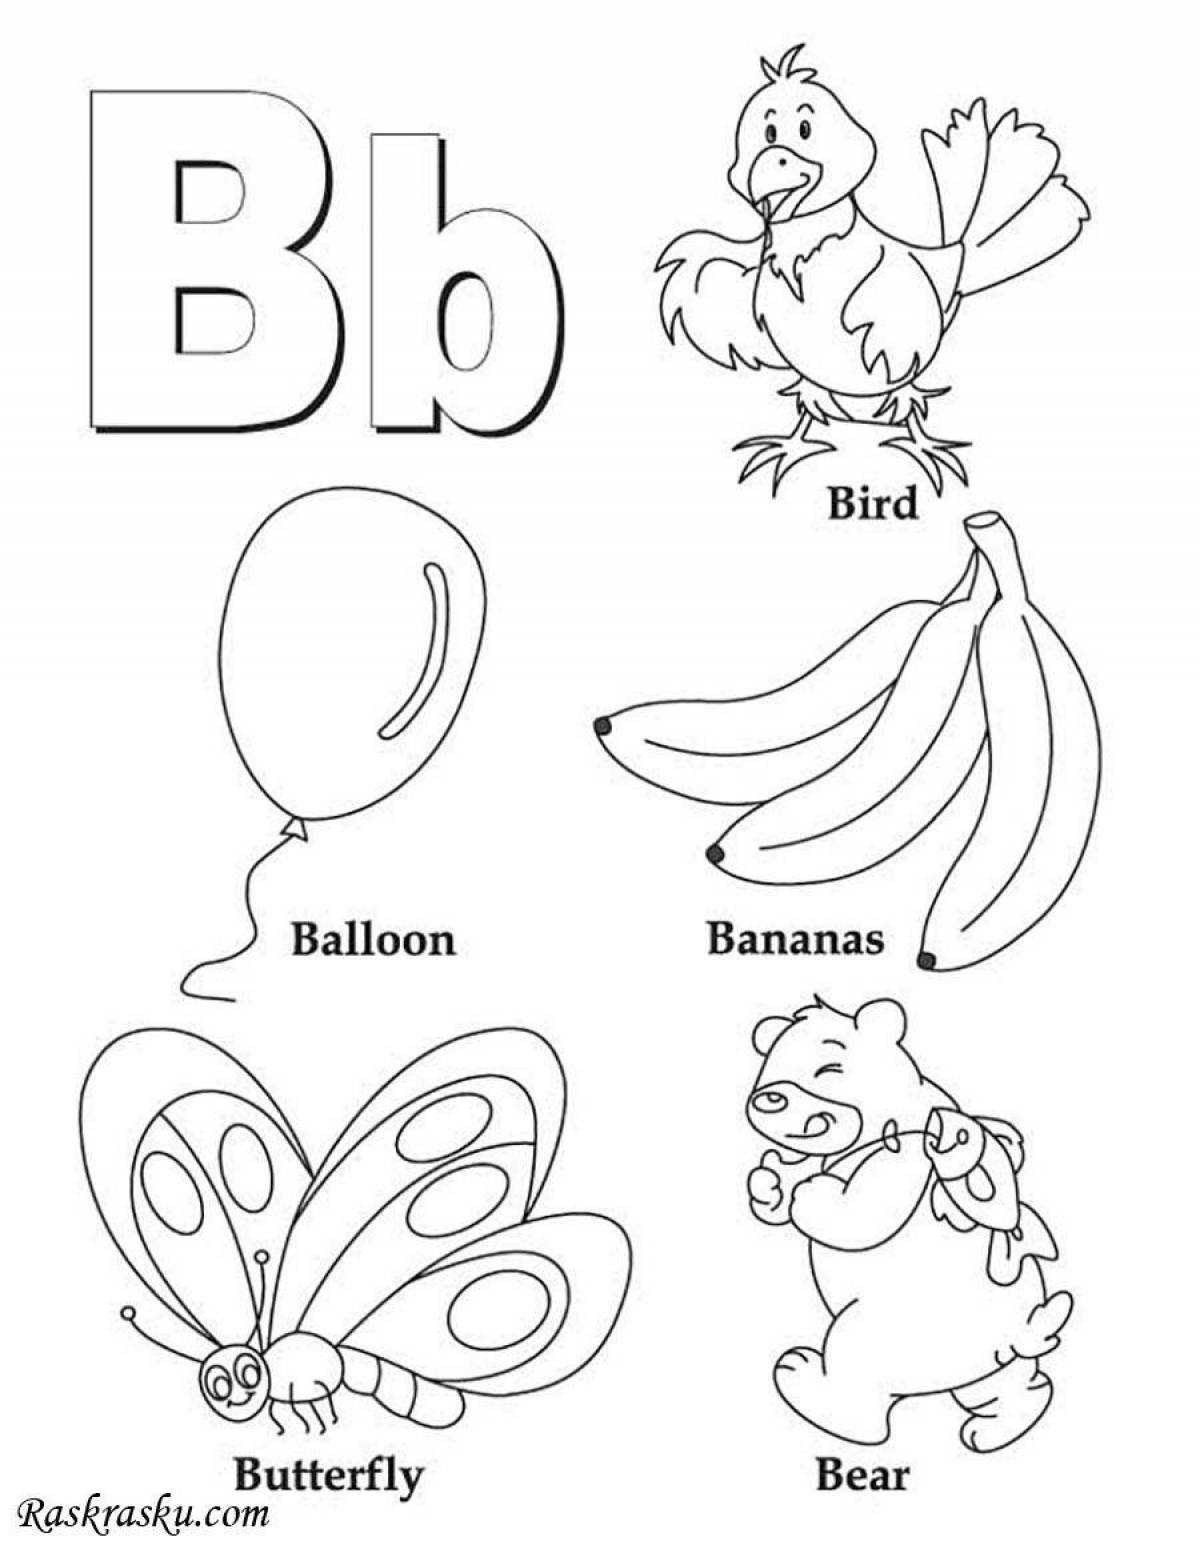 Bright english alphabet coloring page